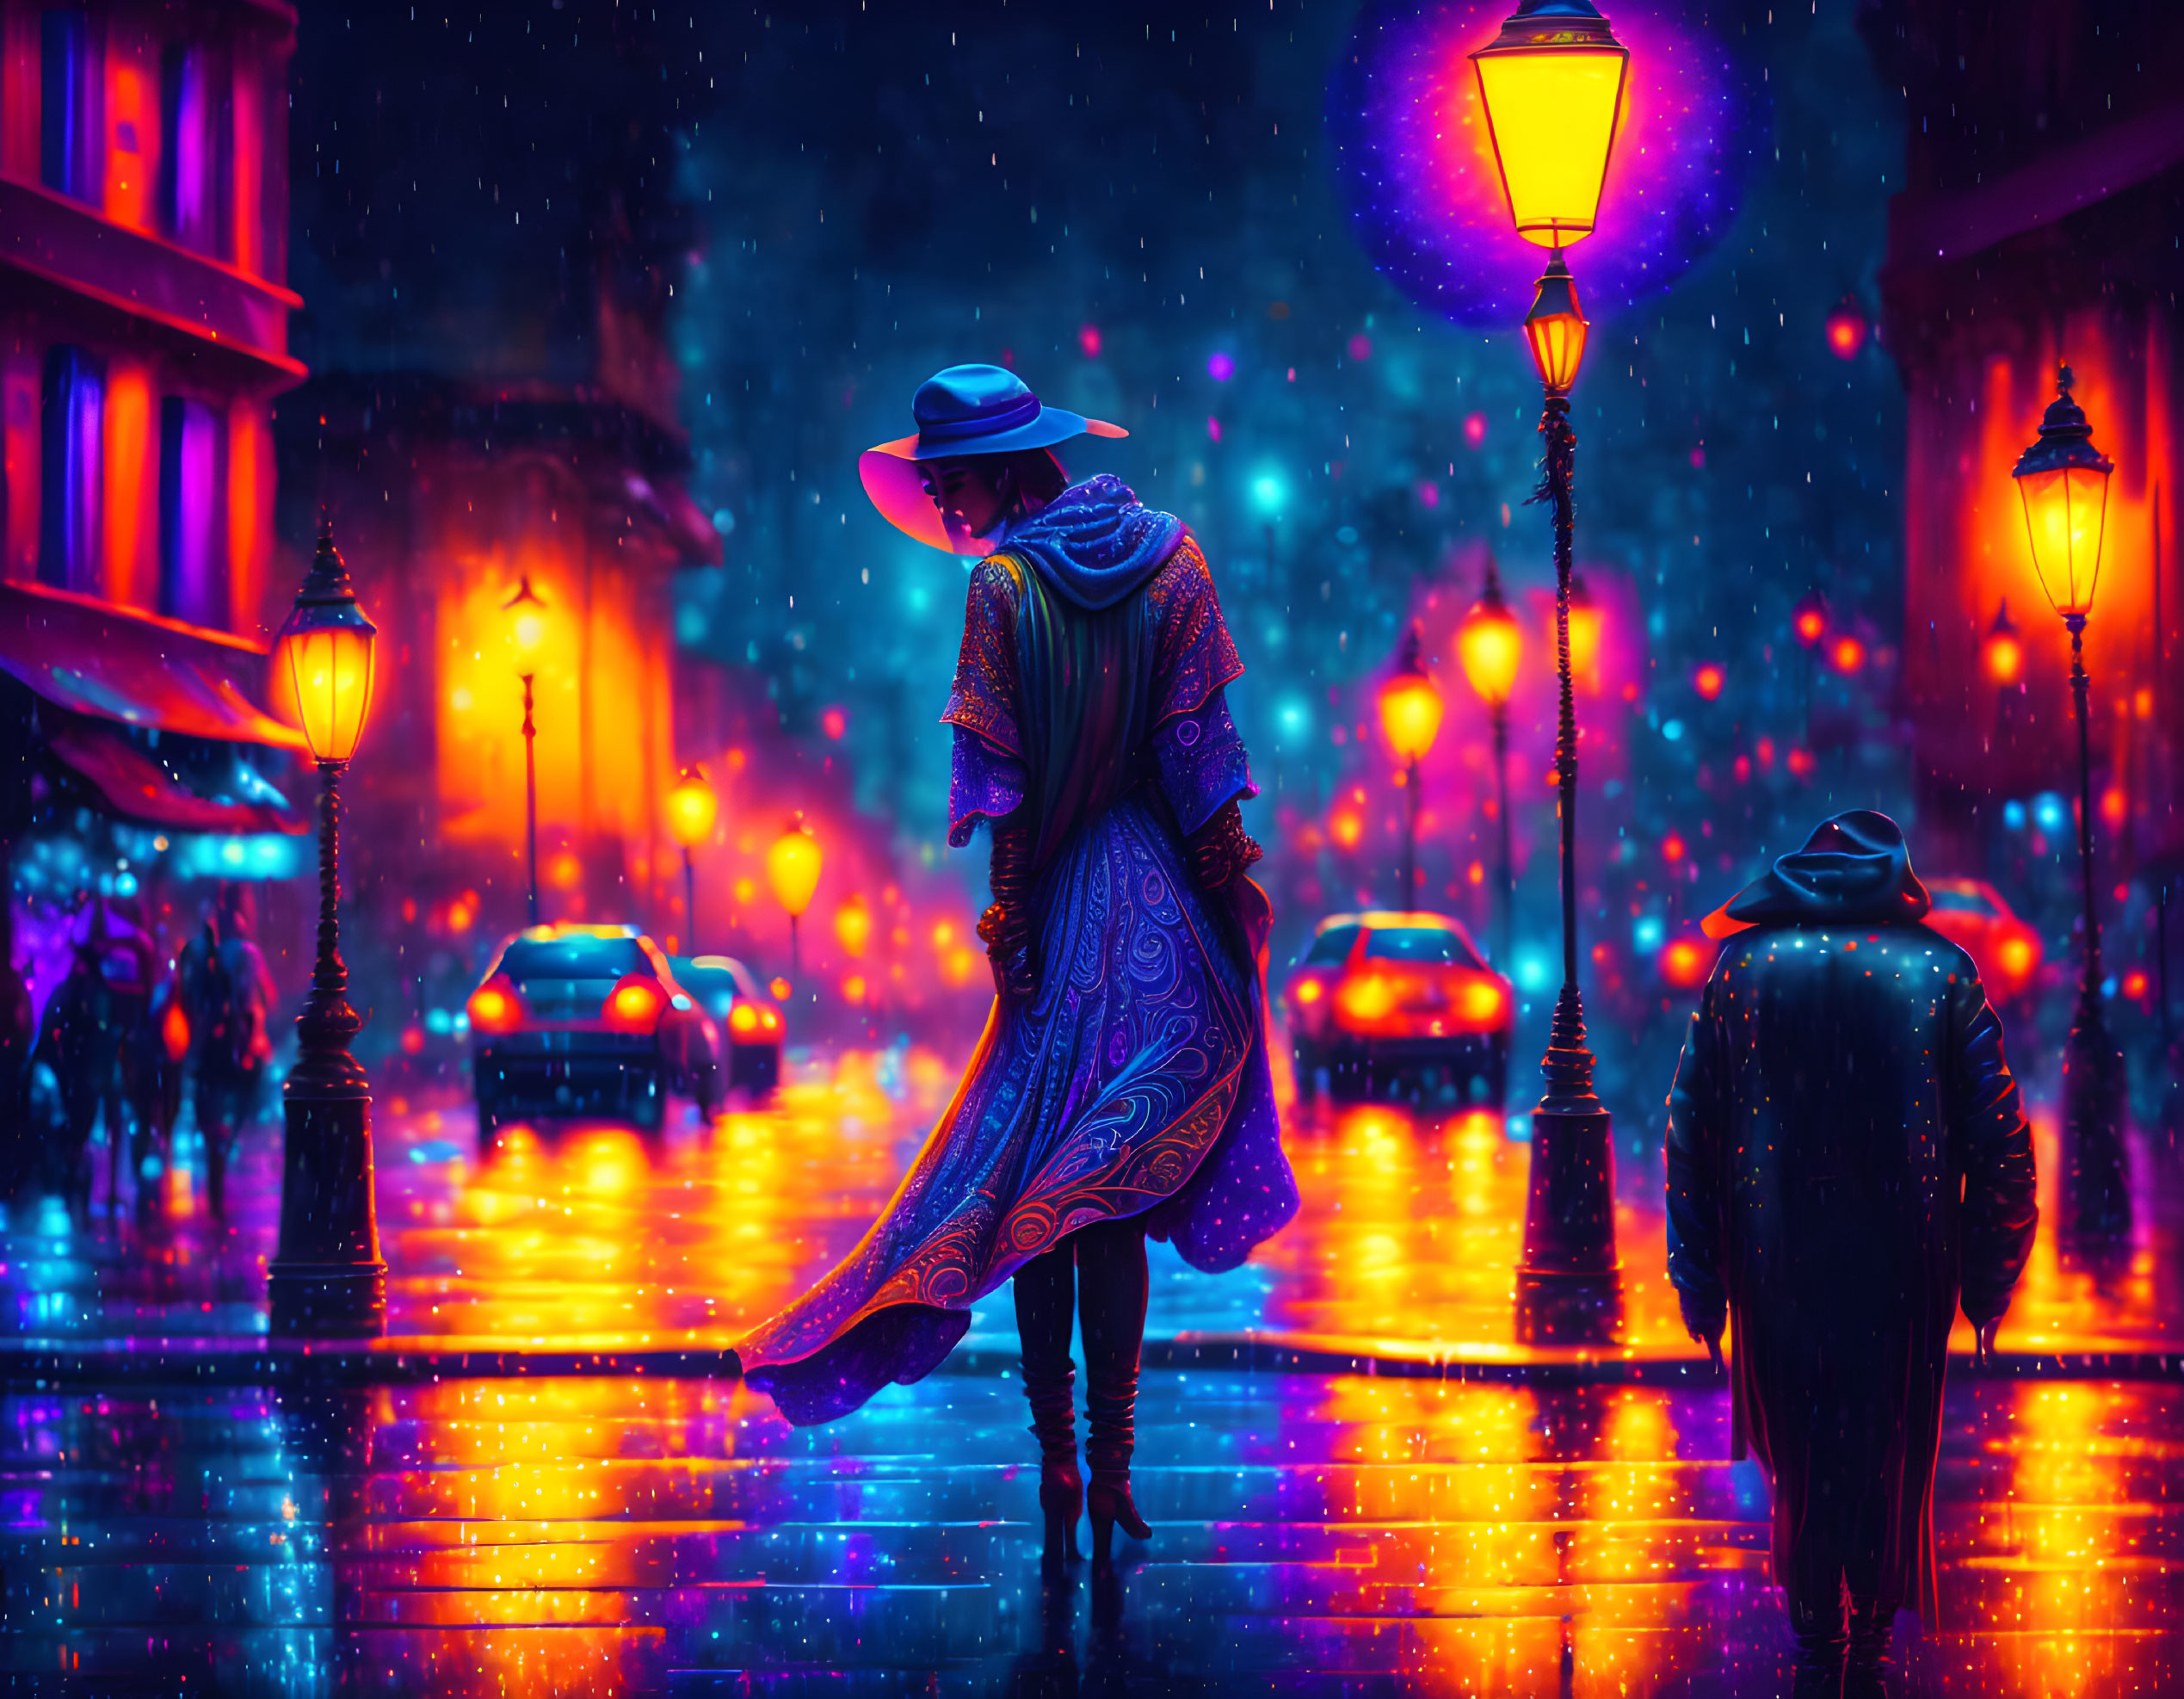 Person in patterned cloak and hat walking on rainy, illuminated street at night